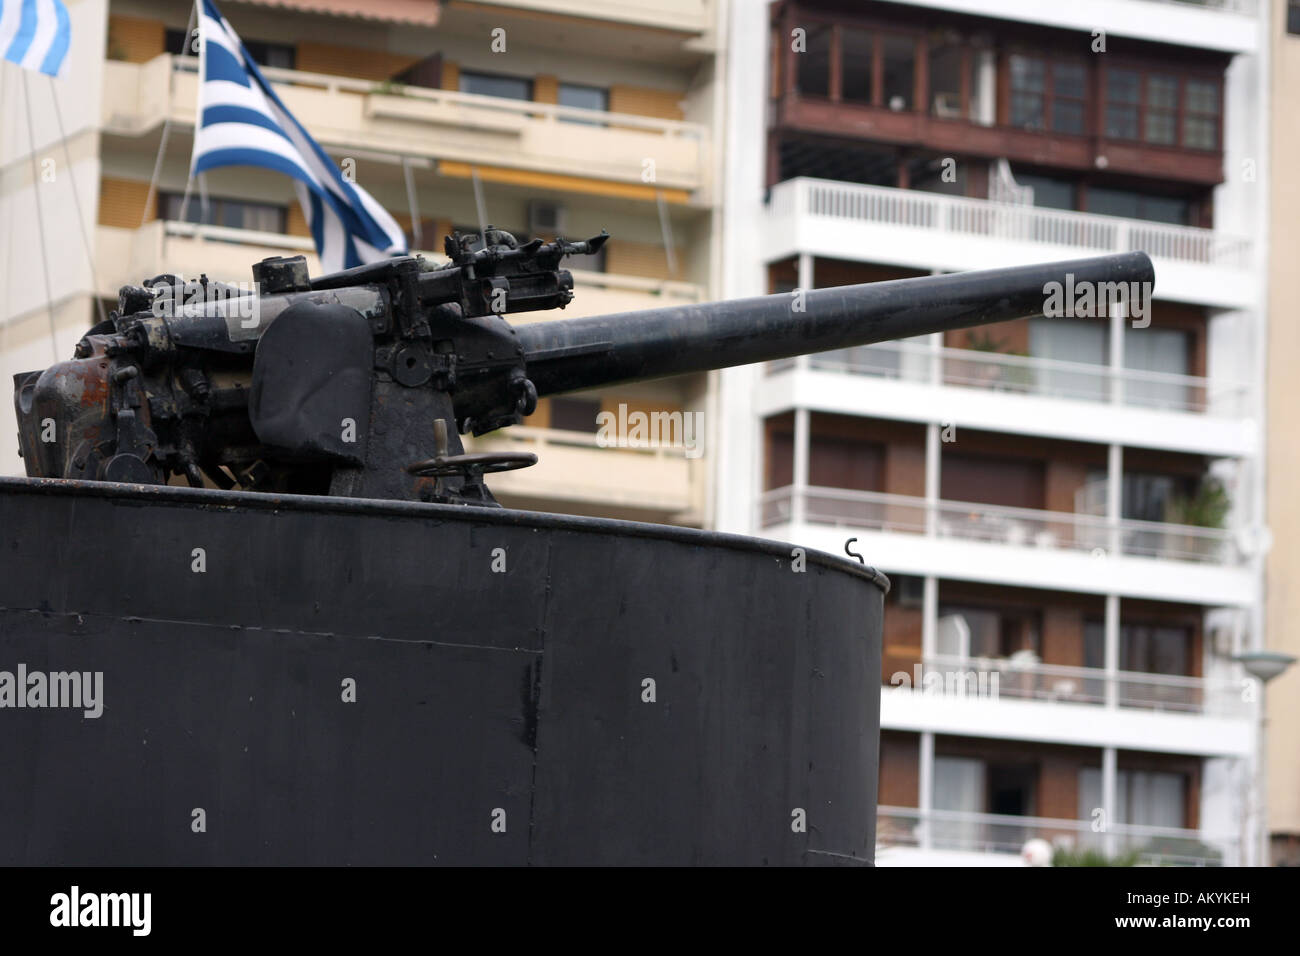 antique fire gun from old navy submarine with houses blur in background at piraeus athens greece Stock Photo